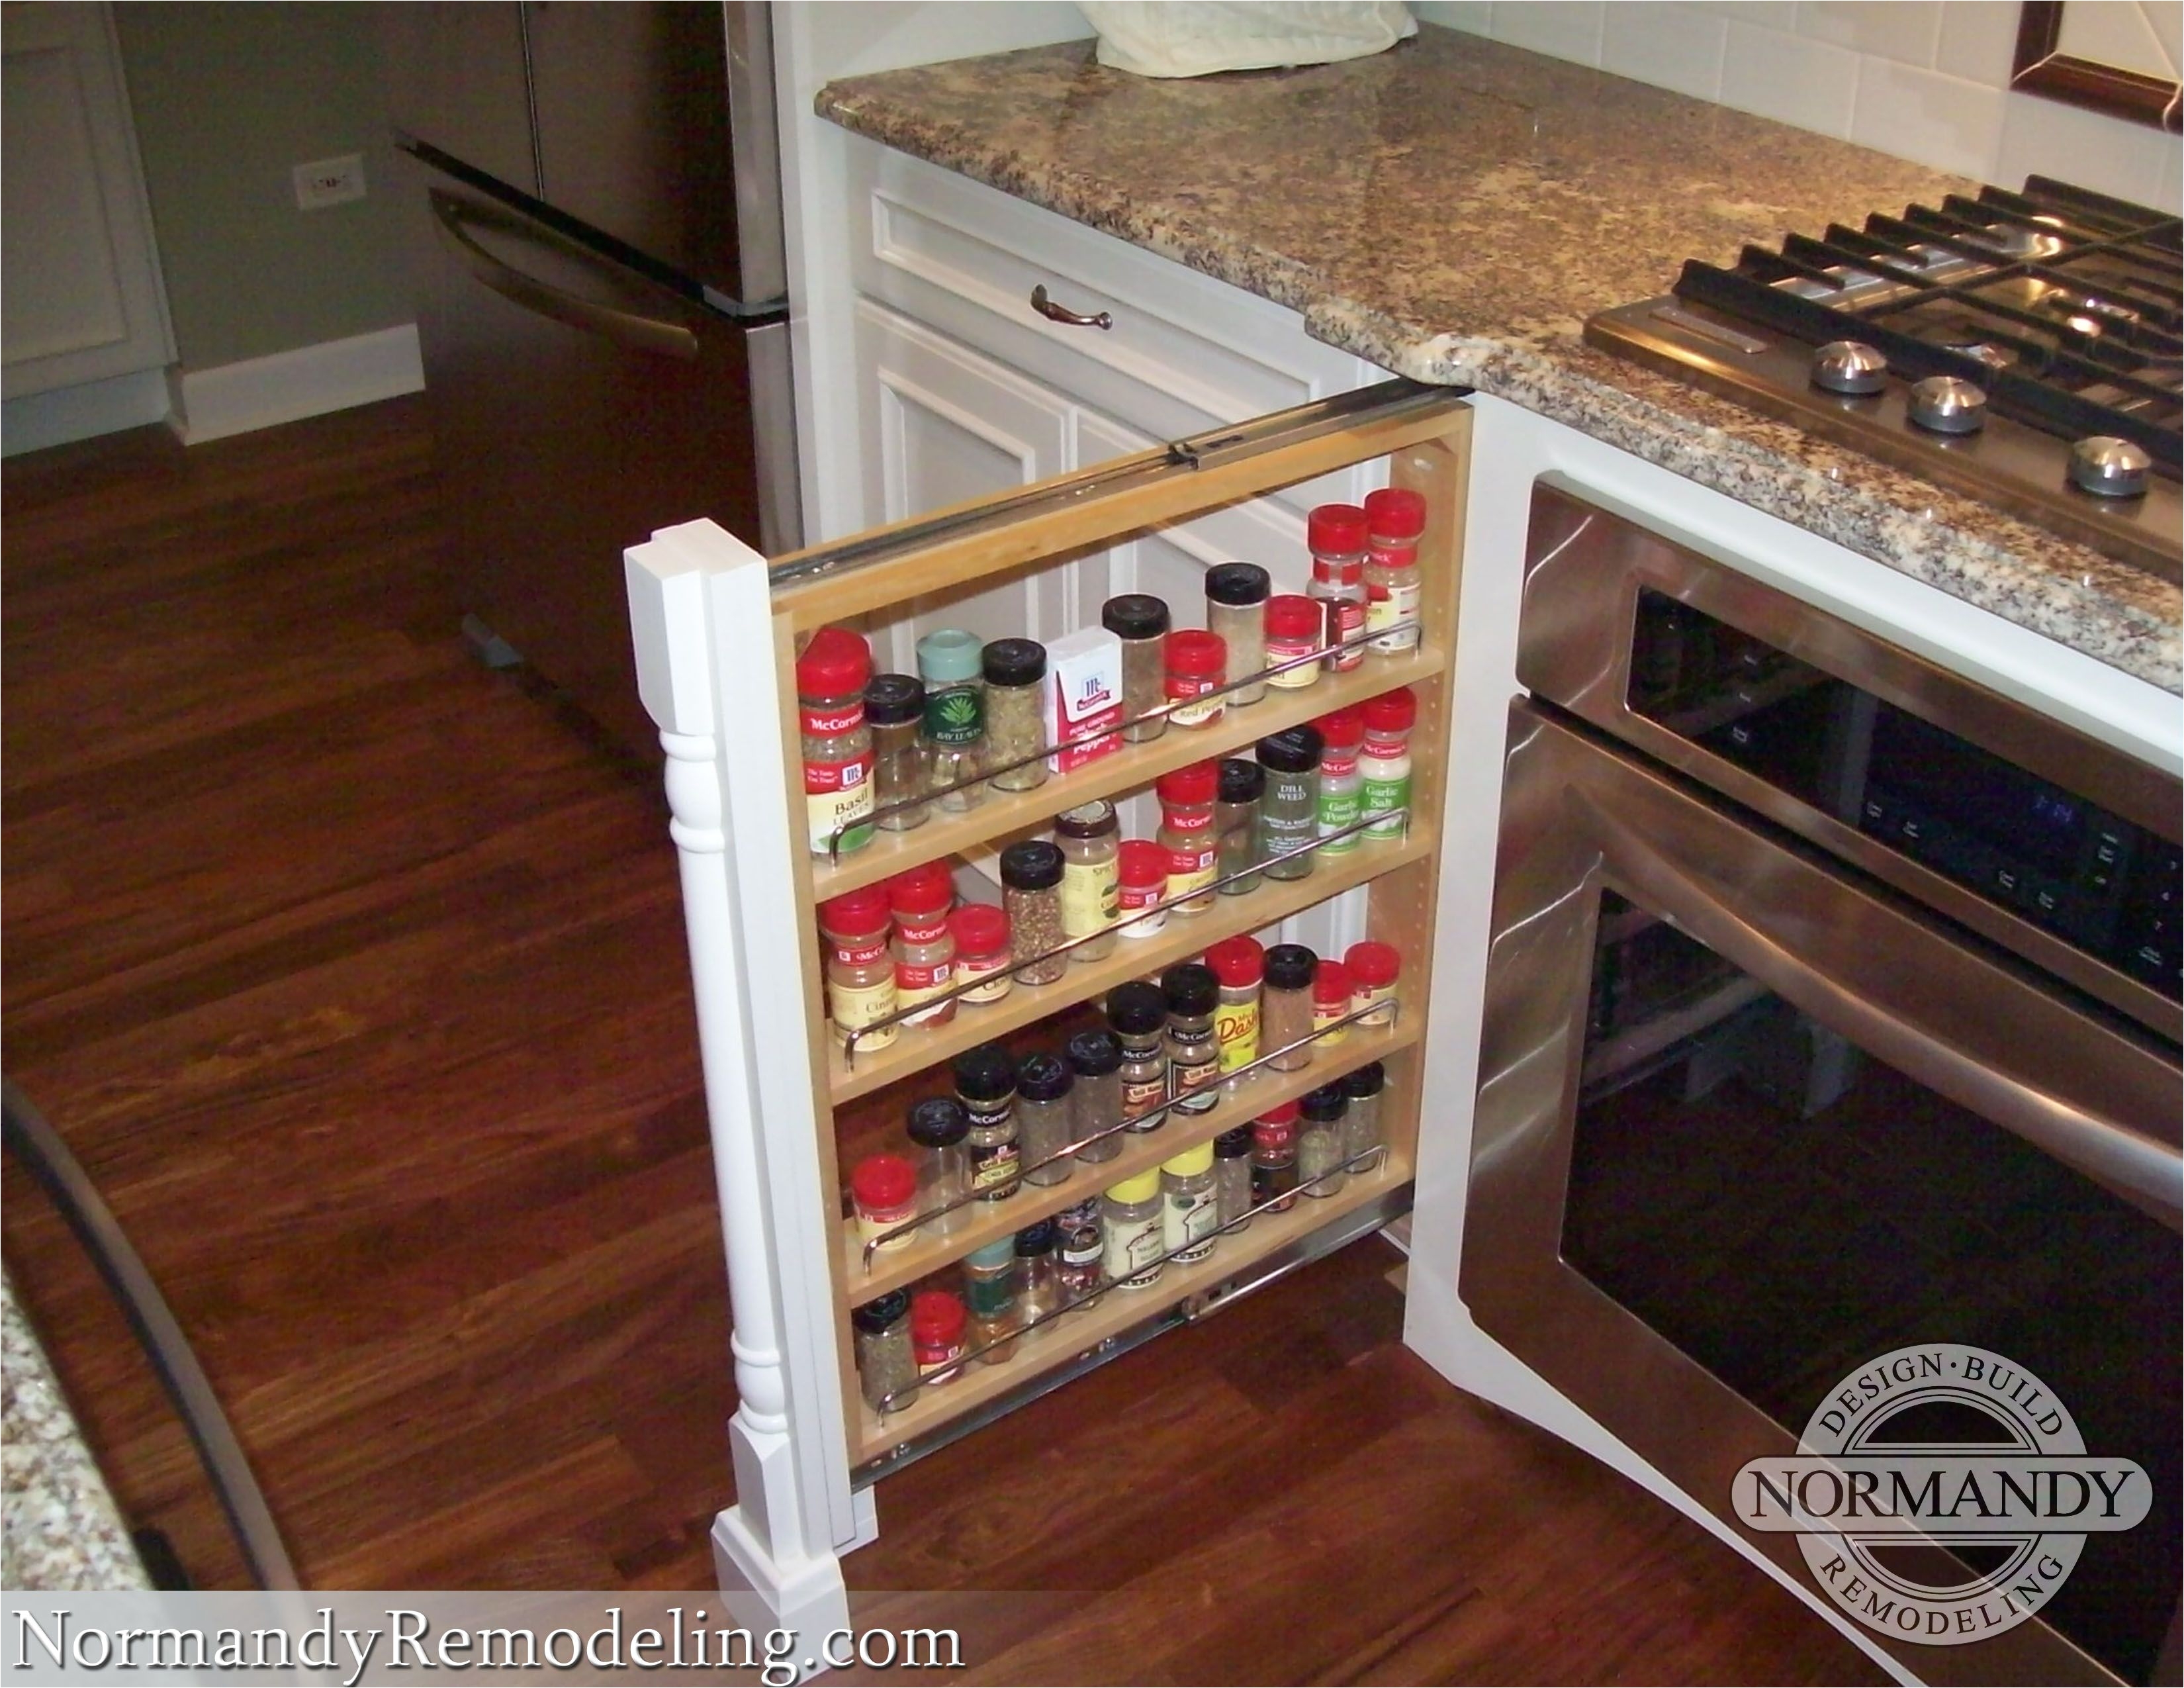 spice rack pilaster on both sides of the stove talk about making the most of